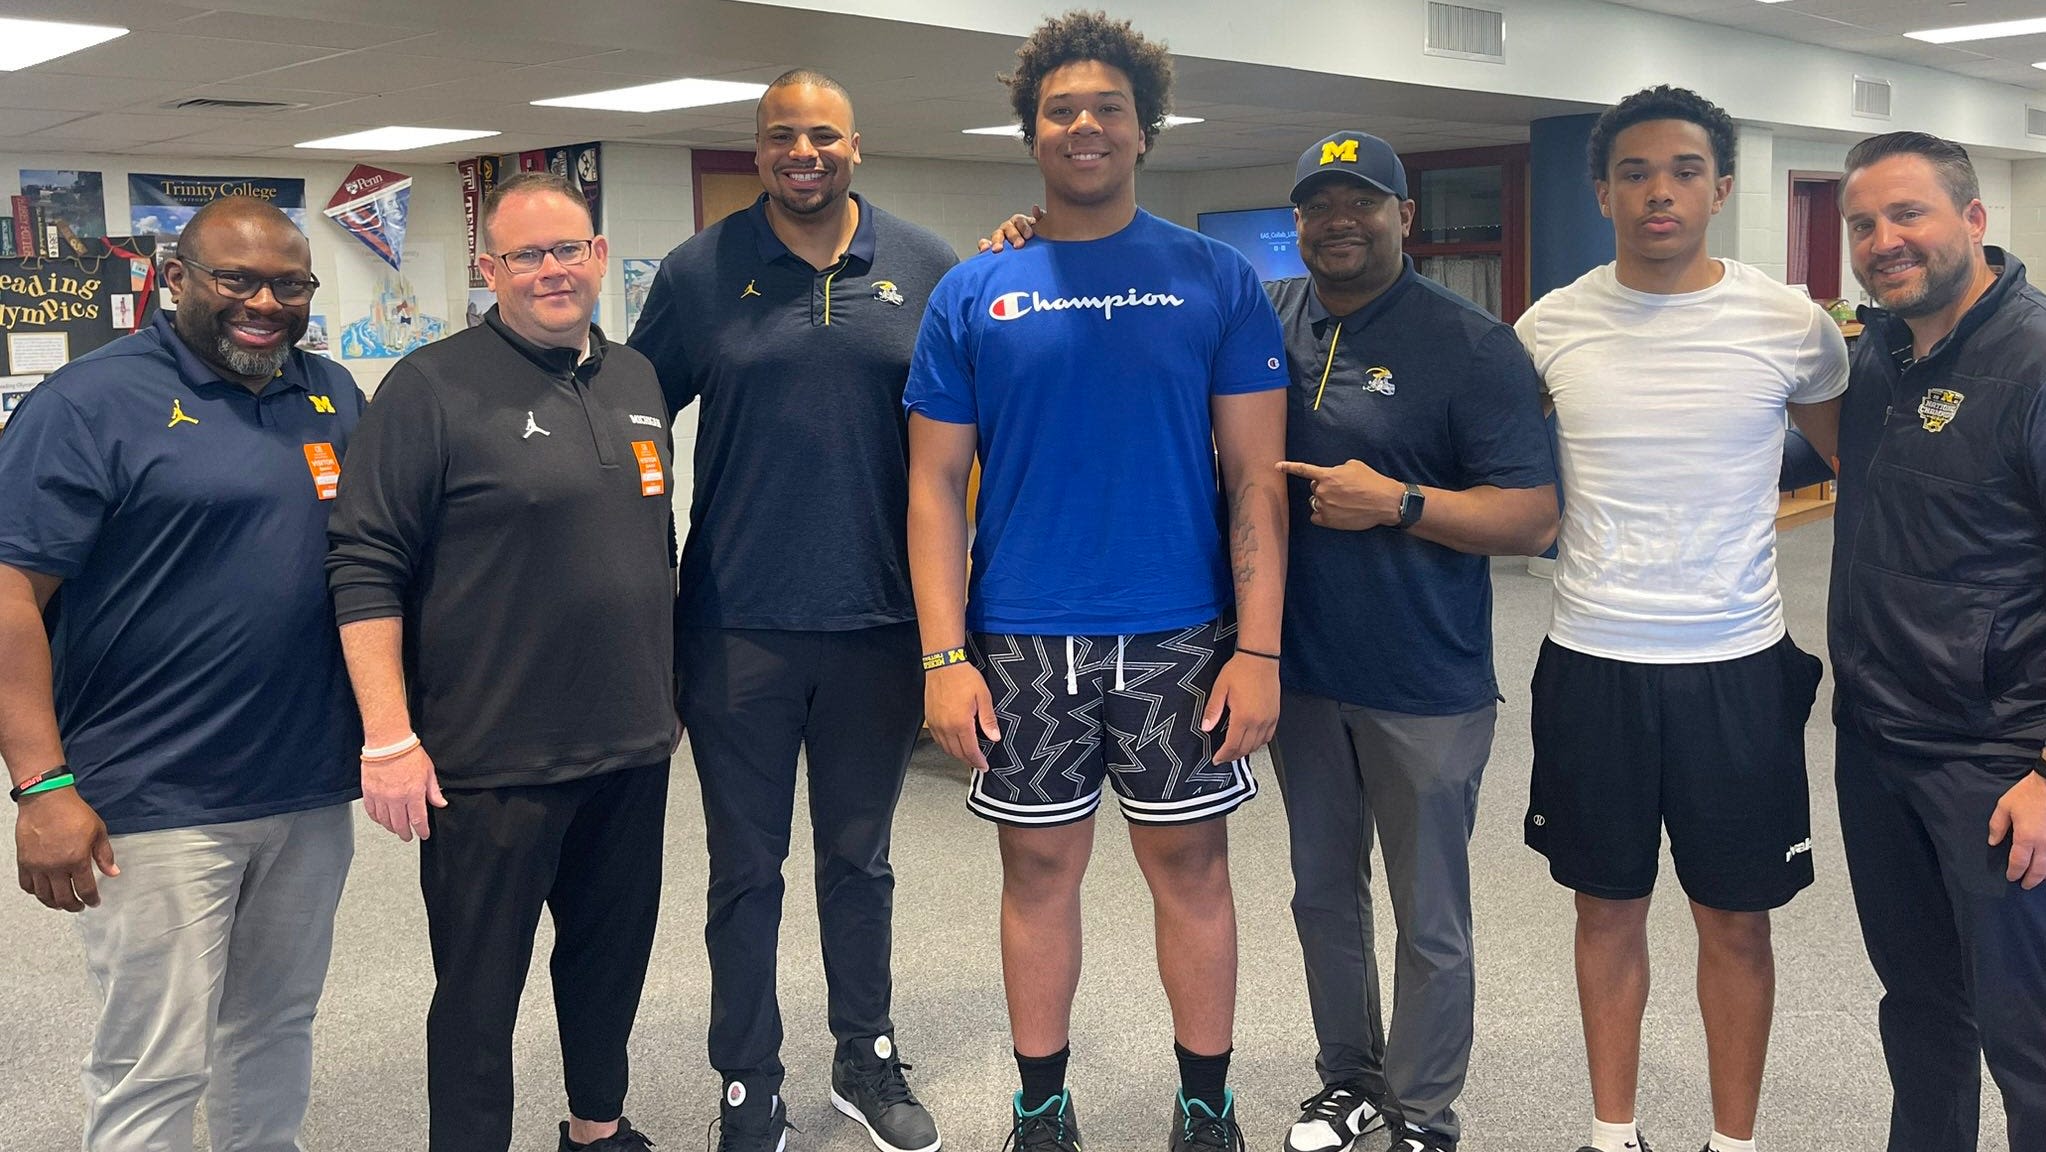 Trieu: Michigan's ability to produce NFL O-linemen a draw for 4-star Michael Carroll